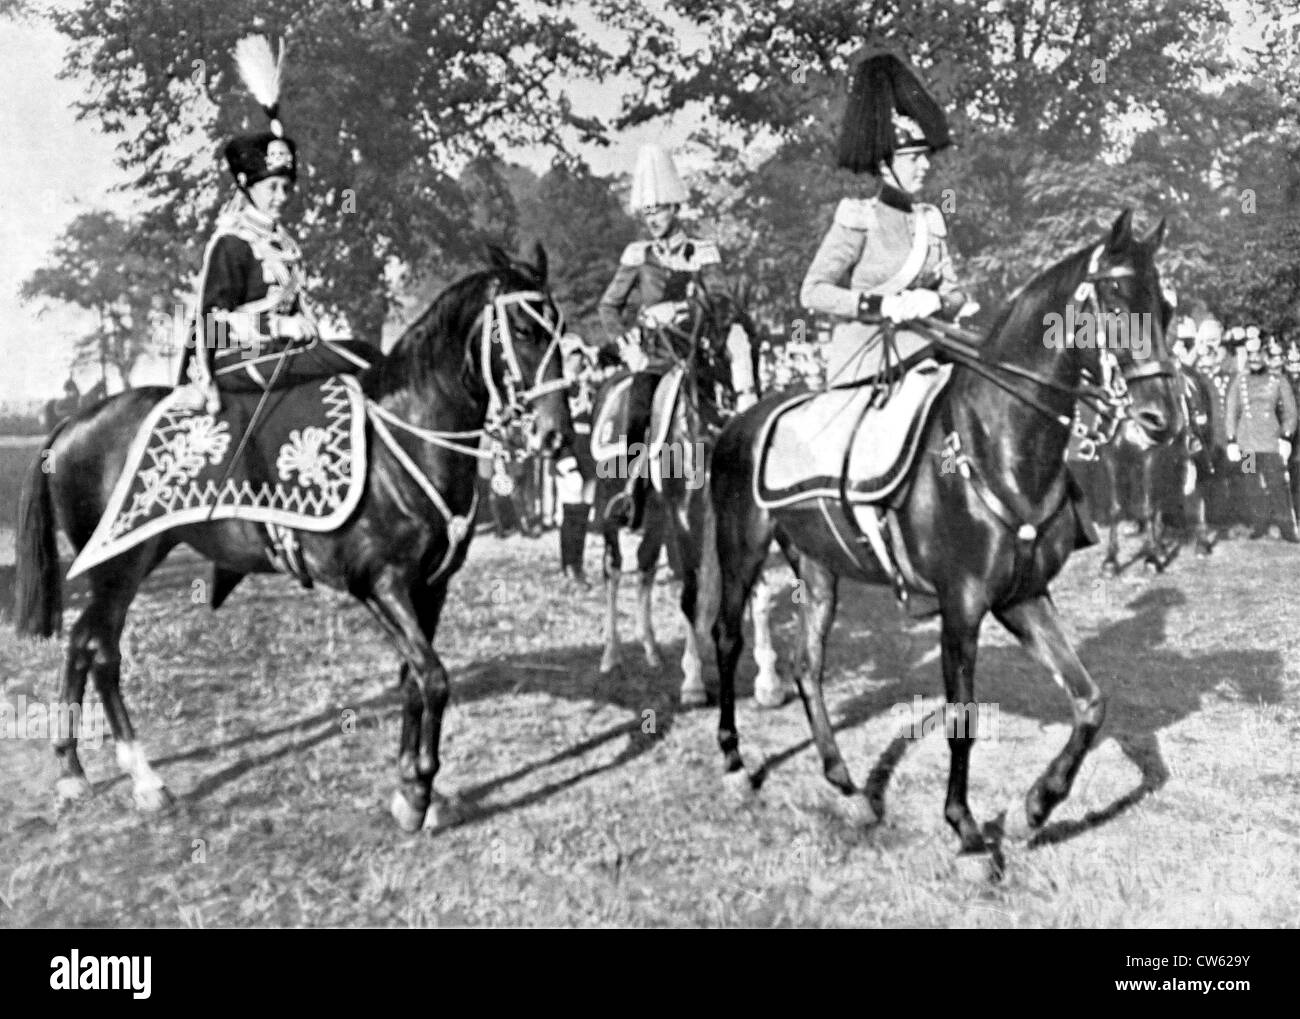 Princess Victoria-Louise and Princess Eitel-Frederic, at the Imperial Guard's parade in Germany, 1911. Stock Photo